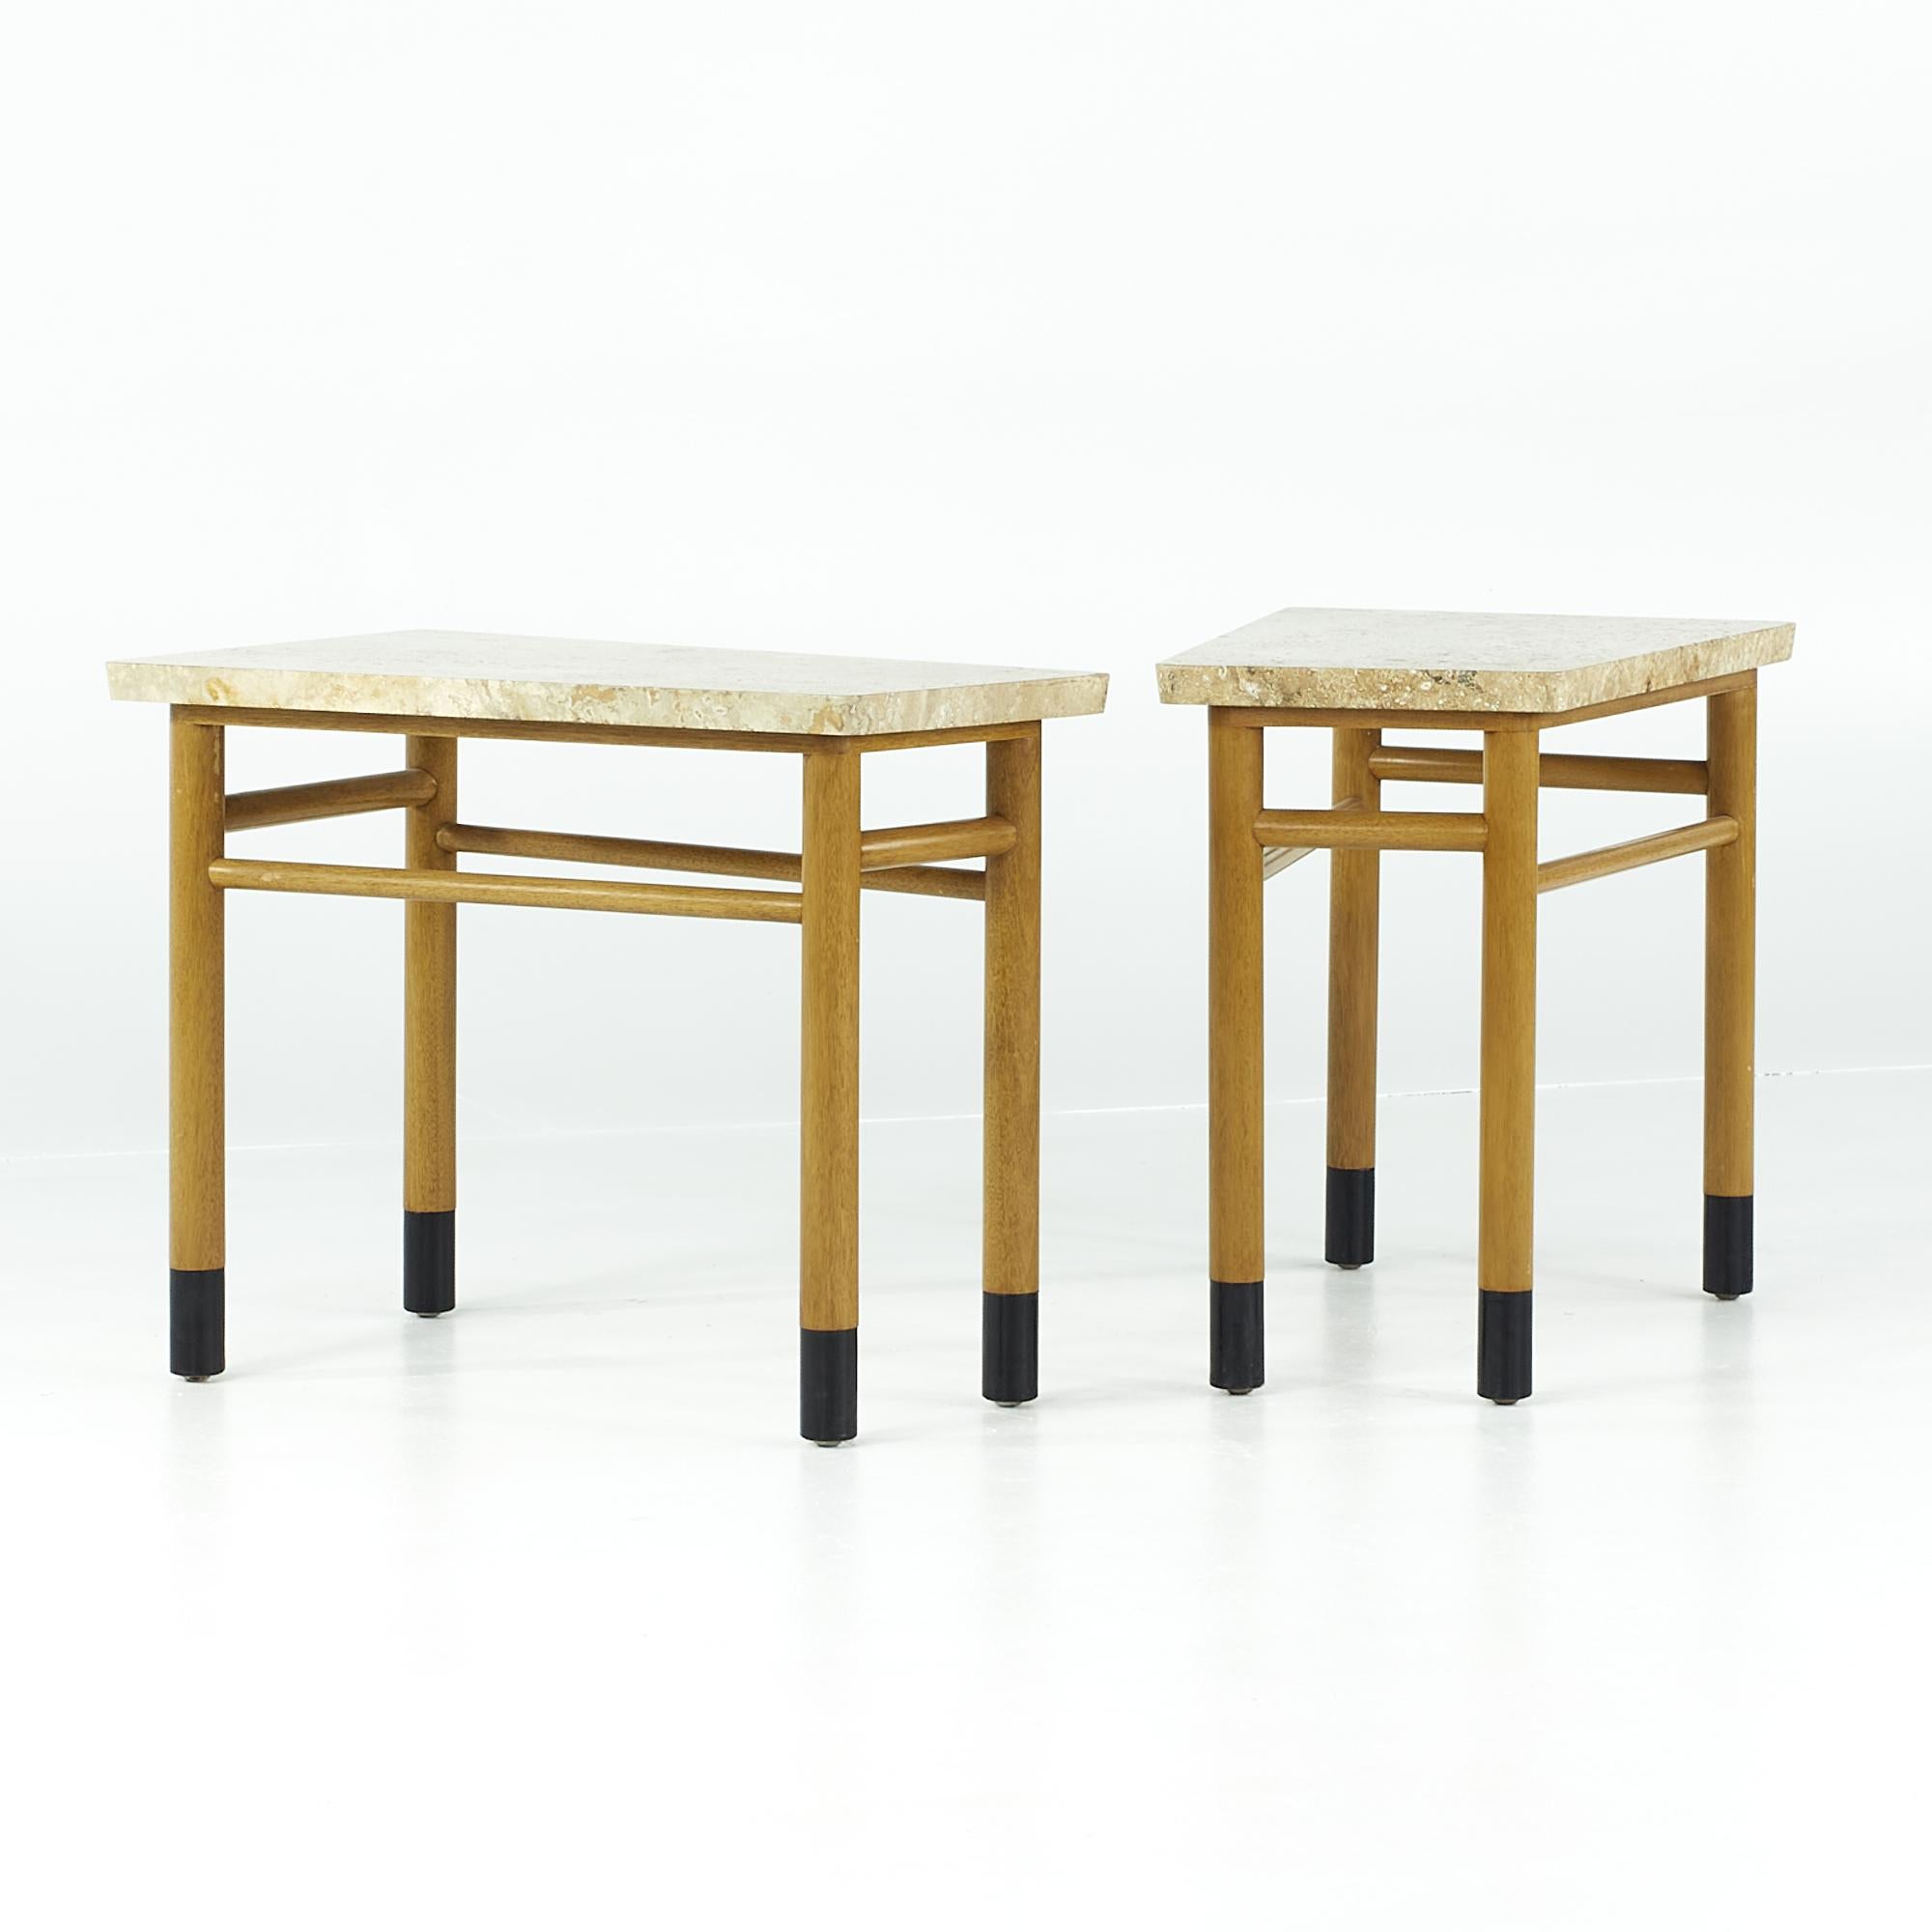 Edward Wormley for Dunbar midcentury travertine wedge tables - pair.

Each table measures: 17.25 wide x 27.25 deep x 21.25 inches high.

All pieces of furniture can be had in what we call restored vintage condition. That means the piece is